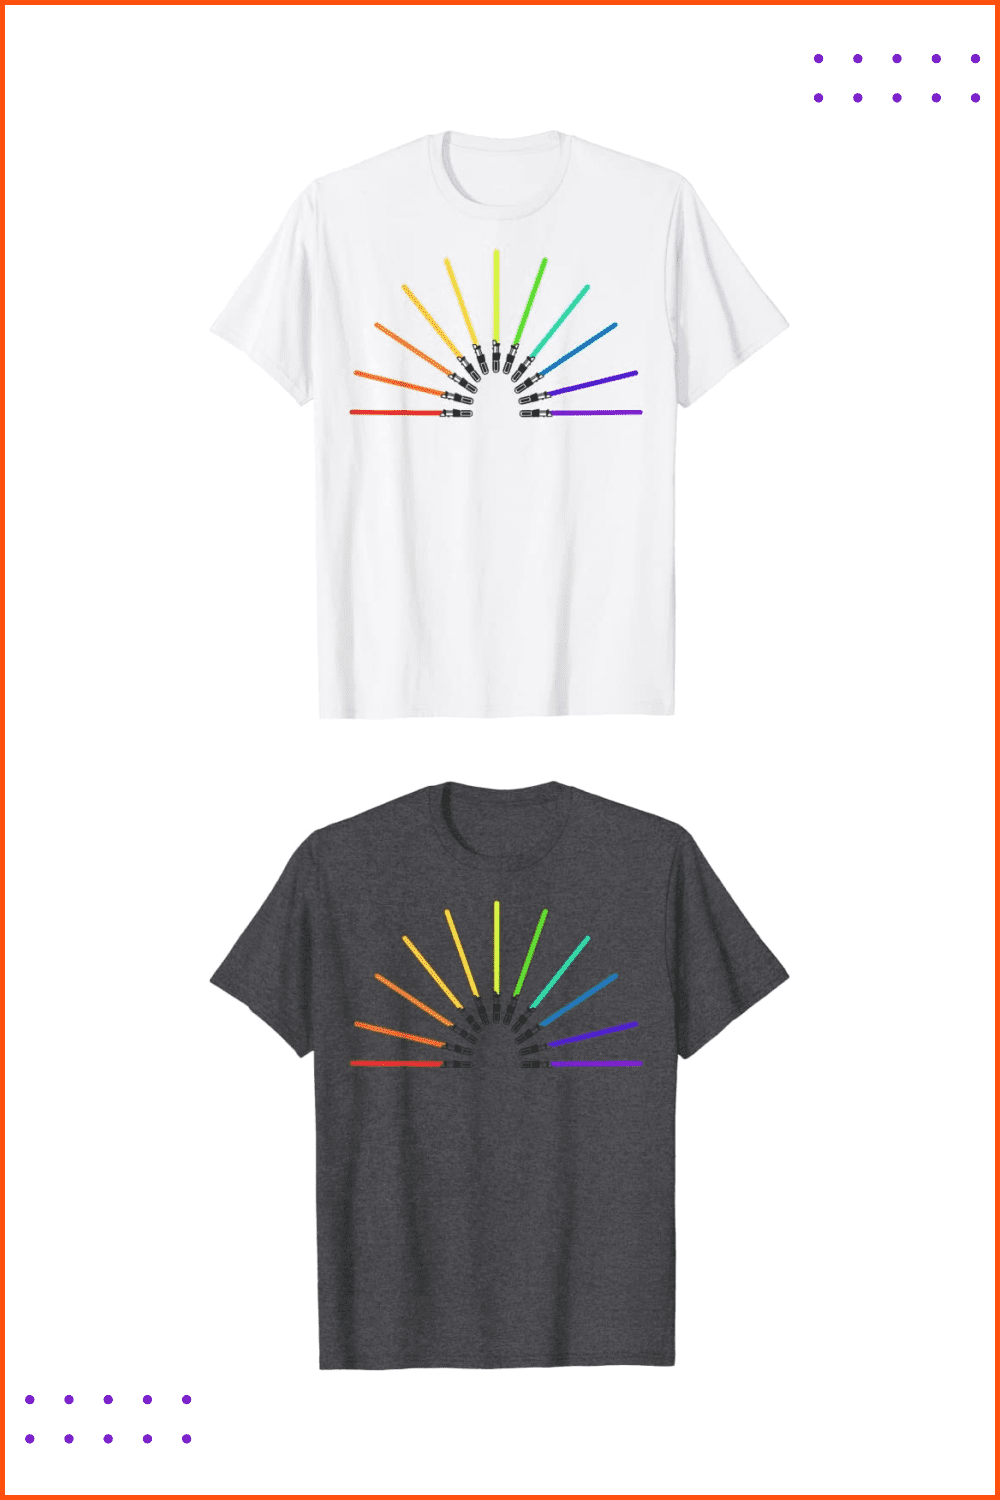 White t-shirt with lightsaber rainbow.